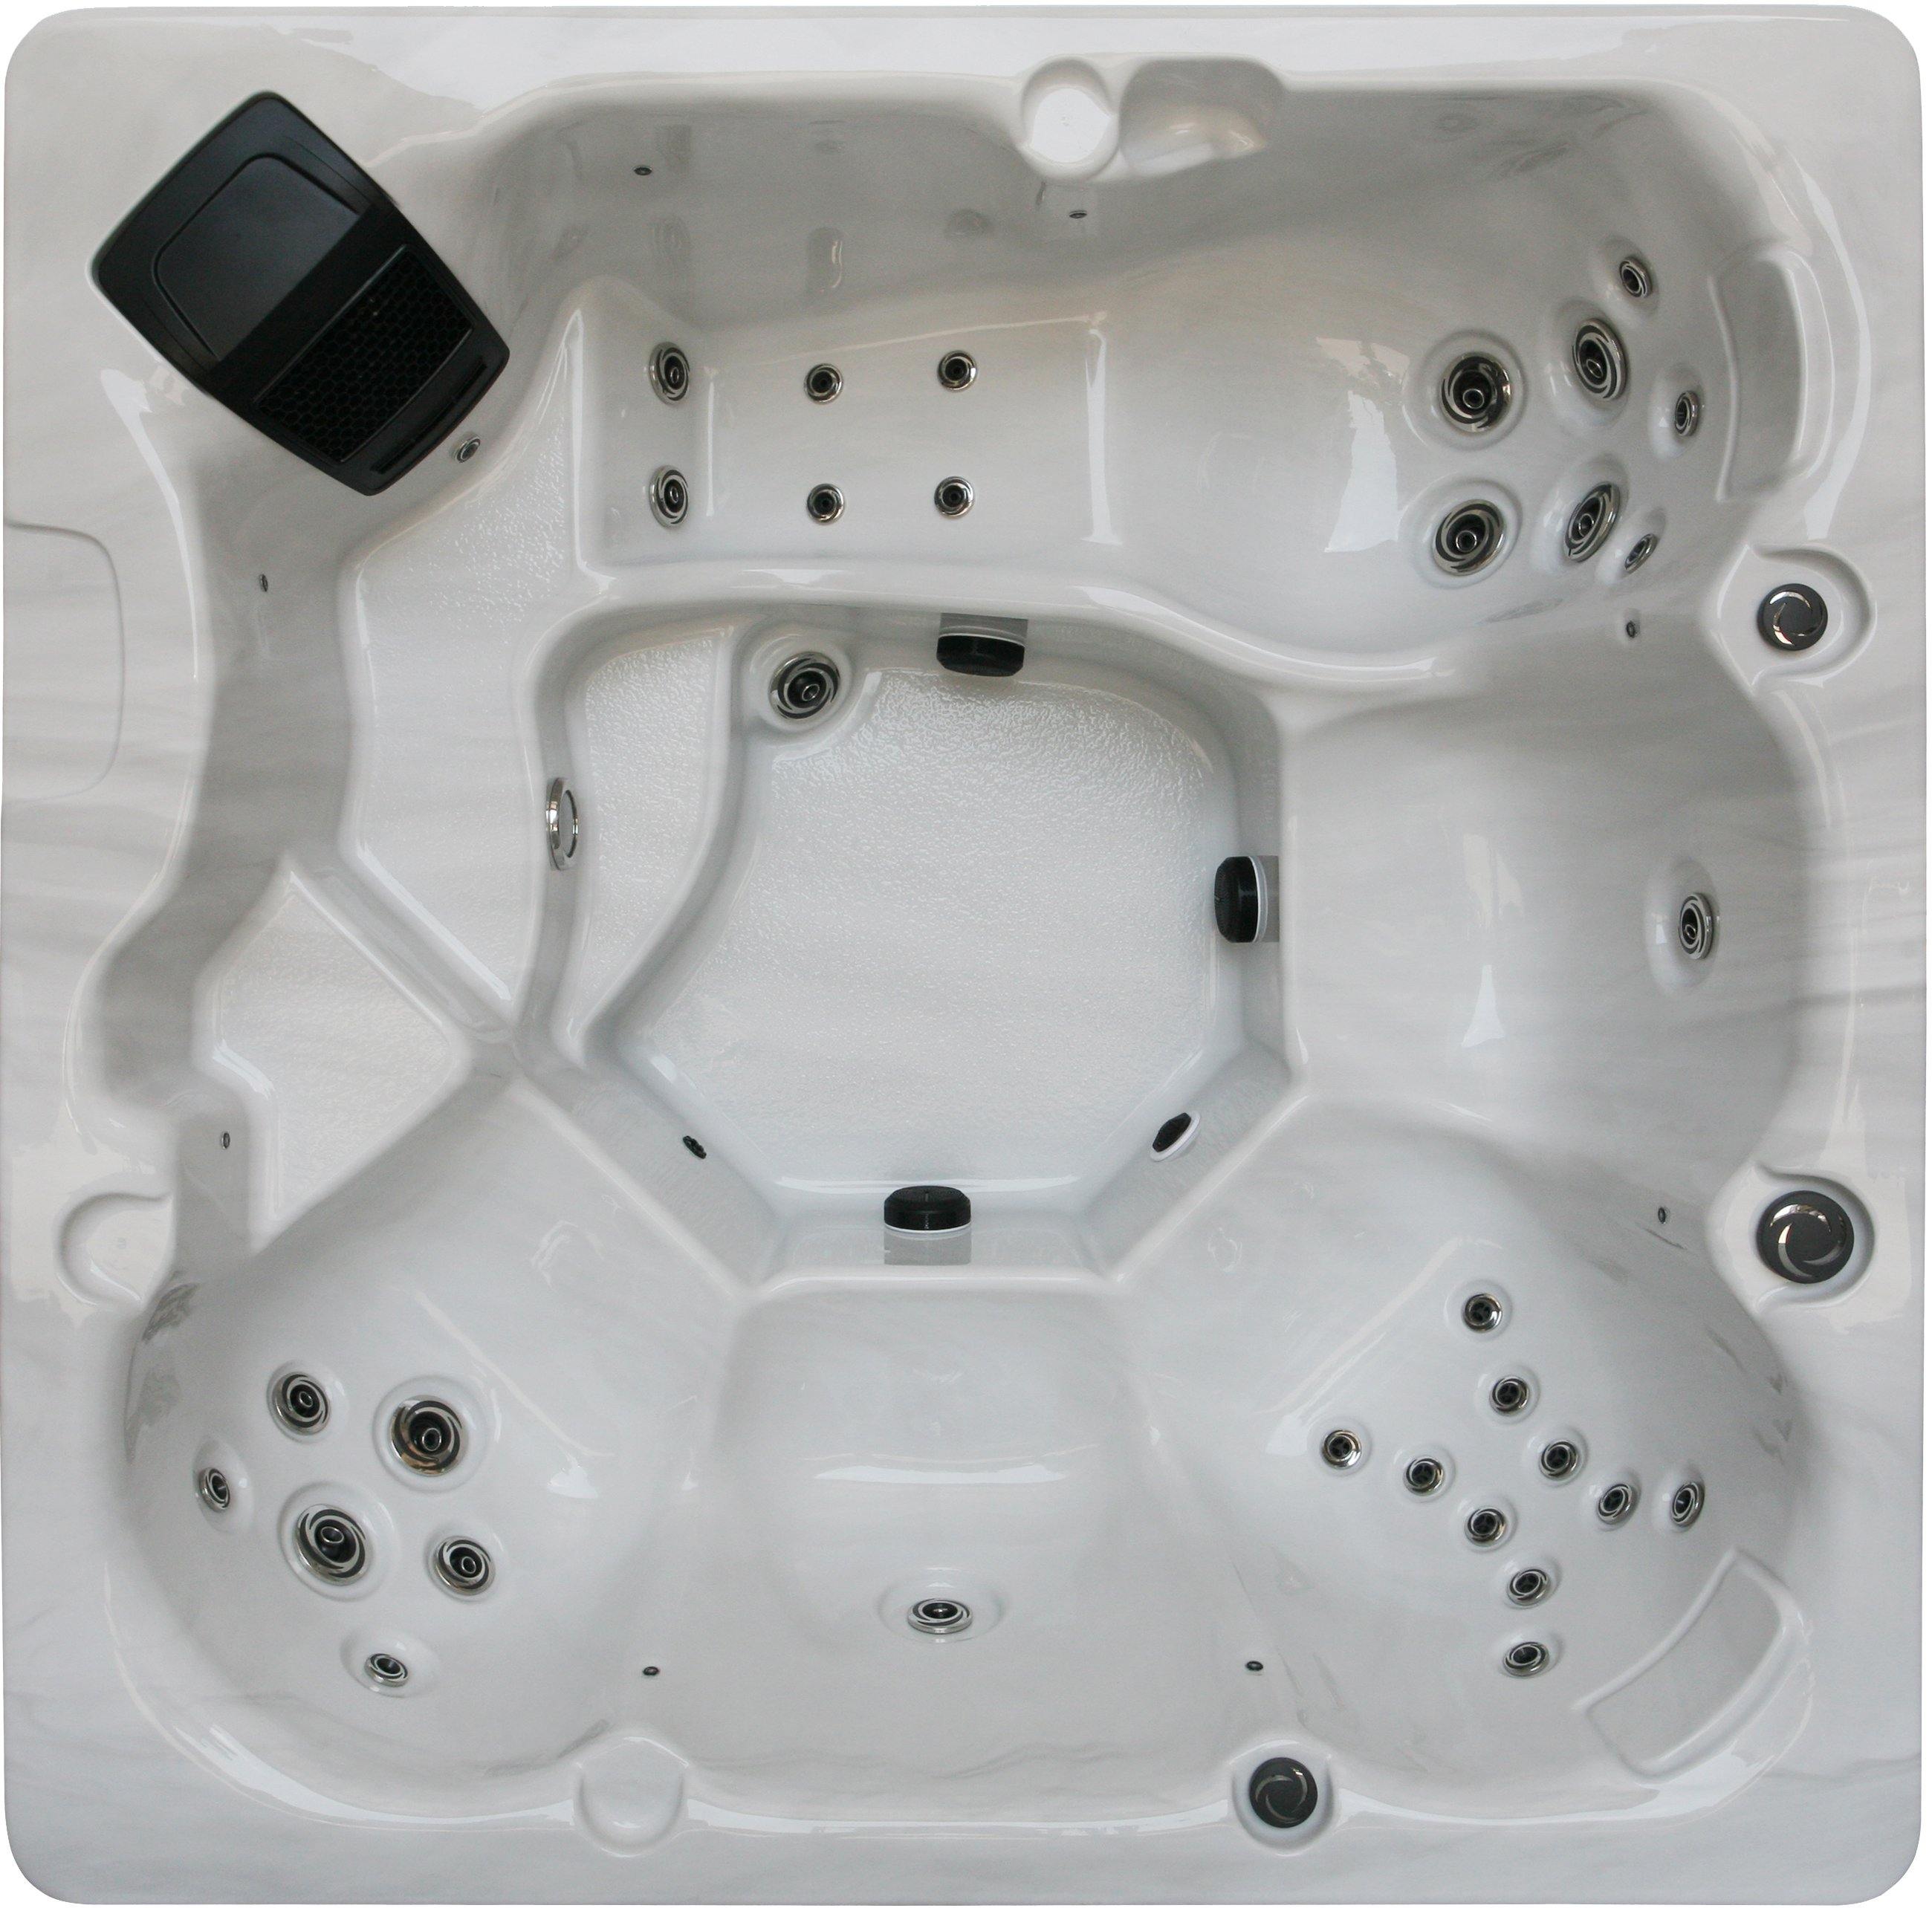 top view of acrylic hot tub Cygnus I, detailed picture of all jets and motor